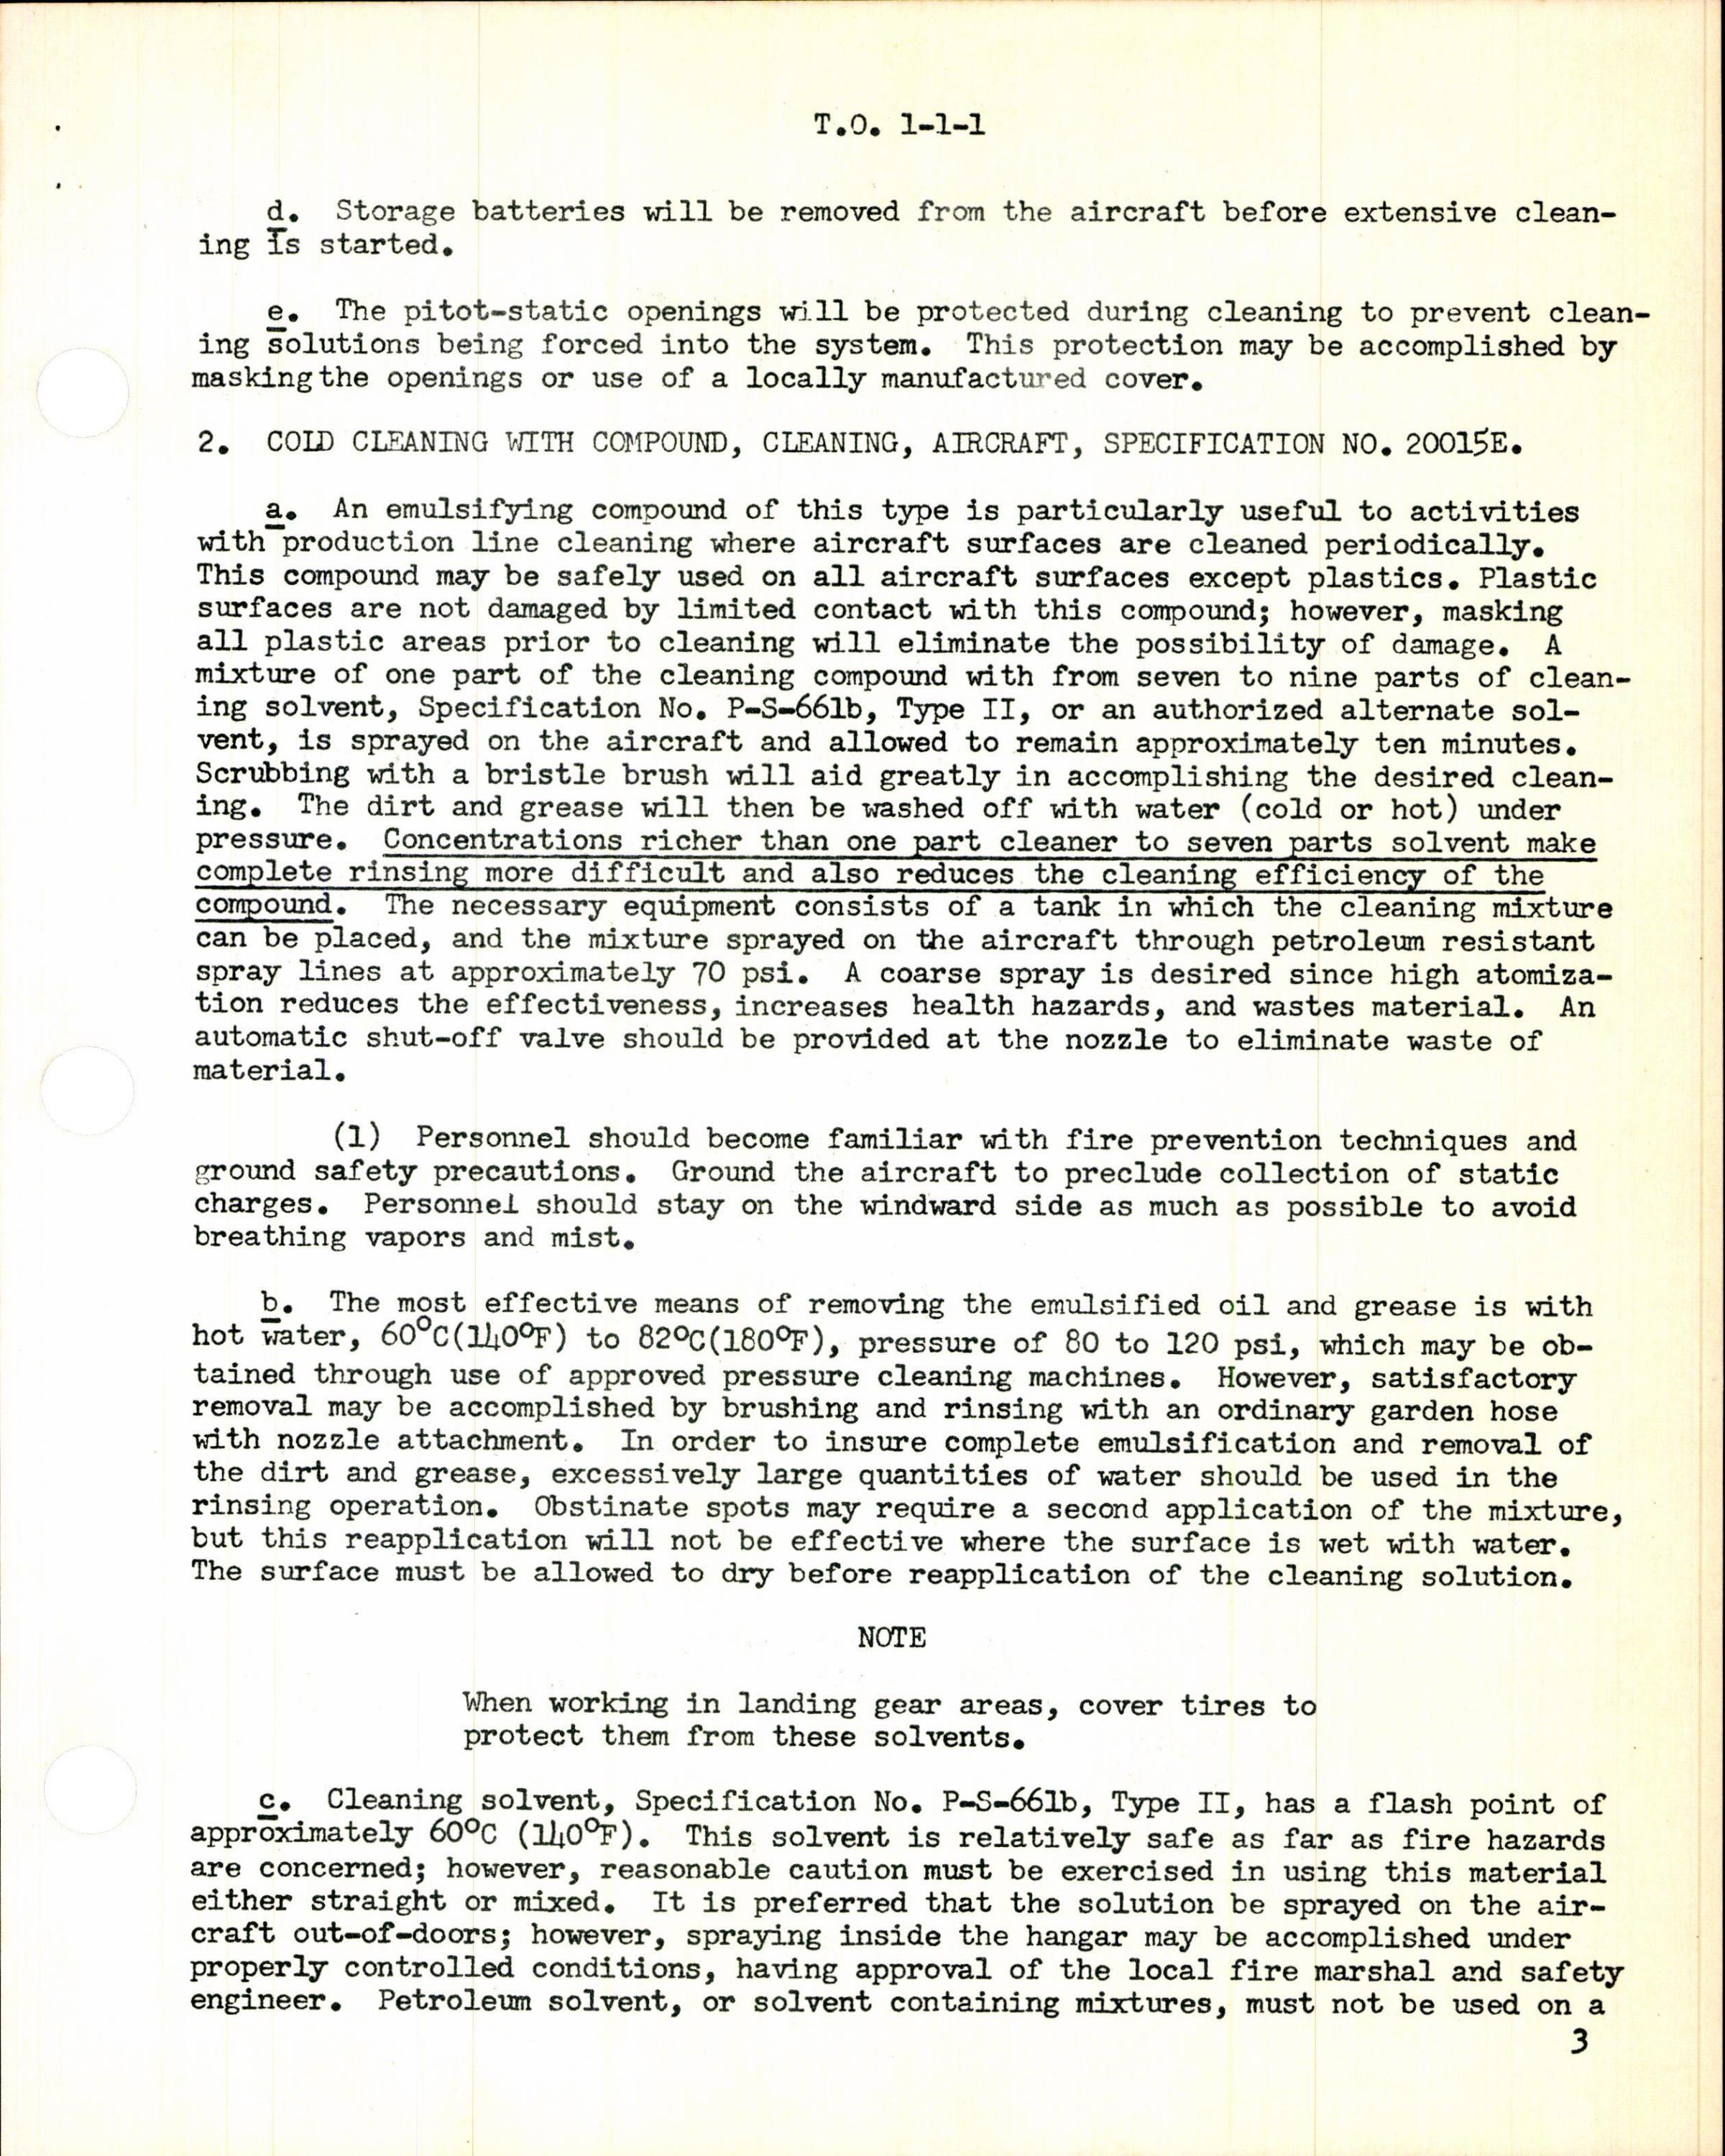 Sample page 3 from AirCorps Library document: Cleaning of Aeronautical Equipment